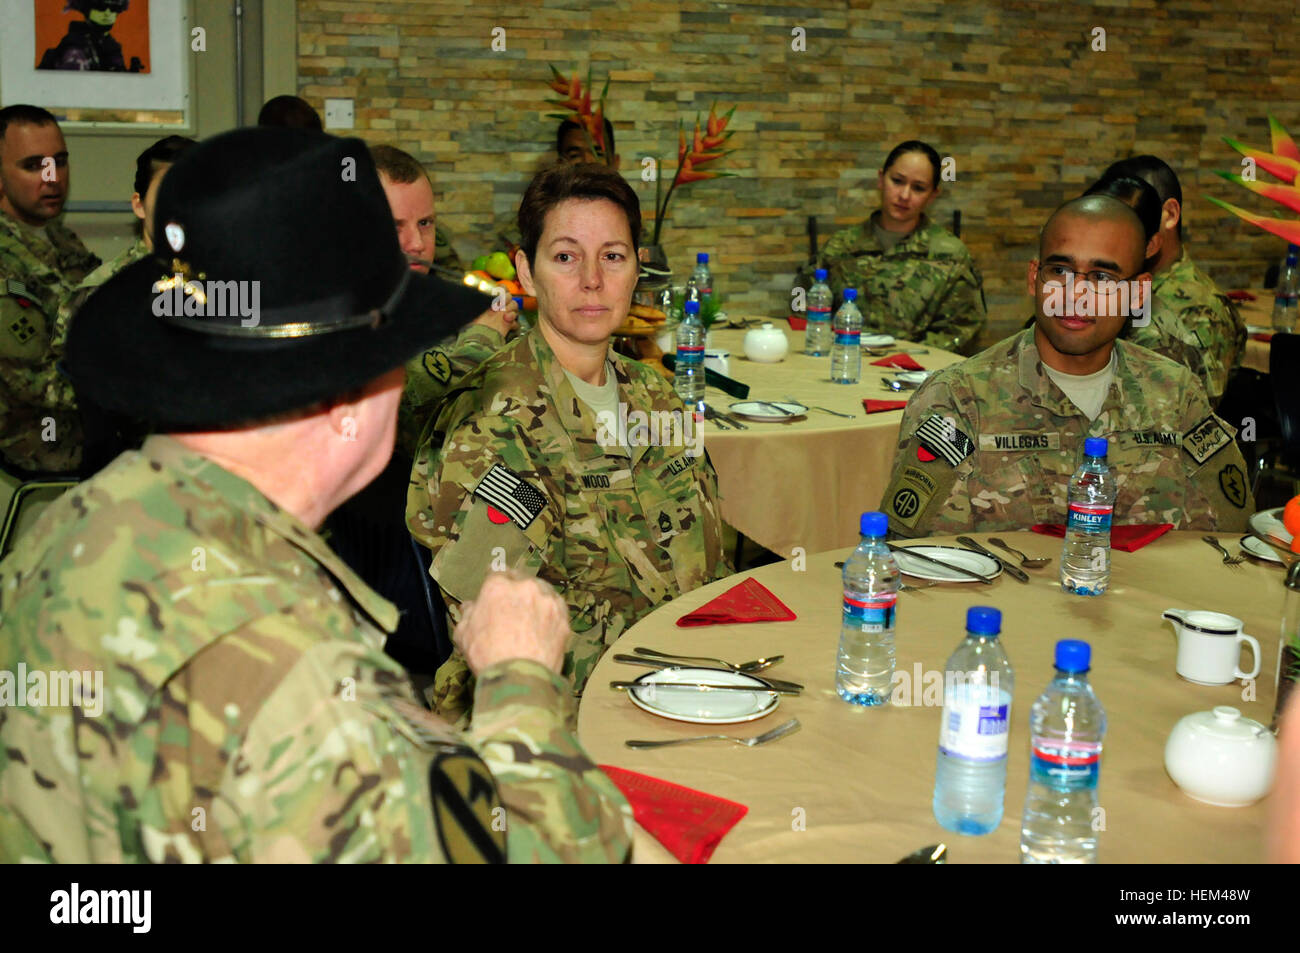 Retired Col. Bruce Crandall, Medal of Honor recipient, talks to soldiers of Headquarters and Headquarters Company, 25th Combat Aviation Brigade, before eating breakfast at a dining facility during his visit to Kandahar Airfield, Afghanistan, March 30. Crandall was awarded the medal of honor for his heroic actions in the Battle of Ia Drang in 1965 and continues to show his support for today's soldiers. Retired Col. Bruce Crandall, Medal of Honor recipient, visits 25th CAB 120330-A-UG106-011 Stock Photo